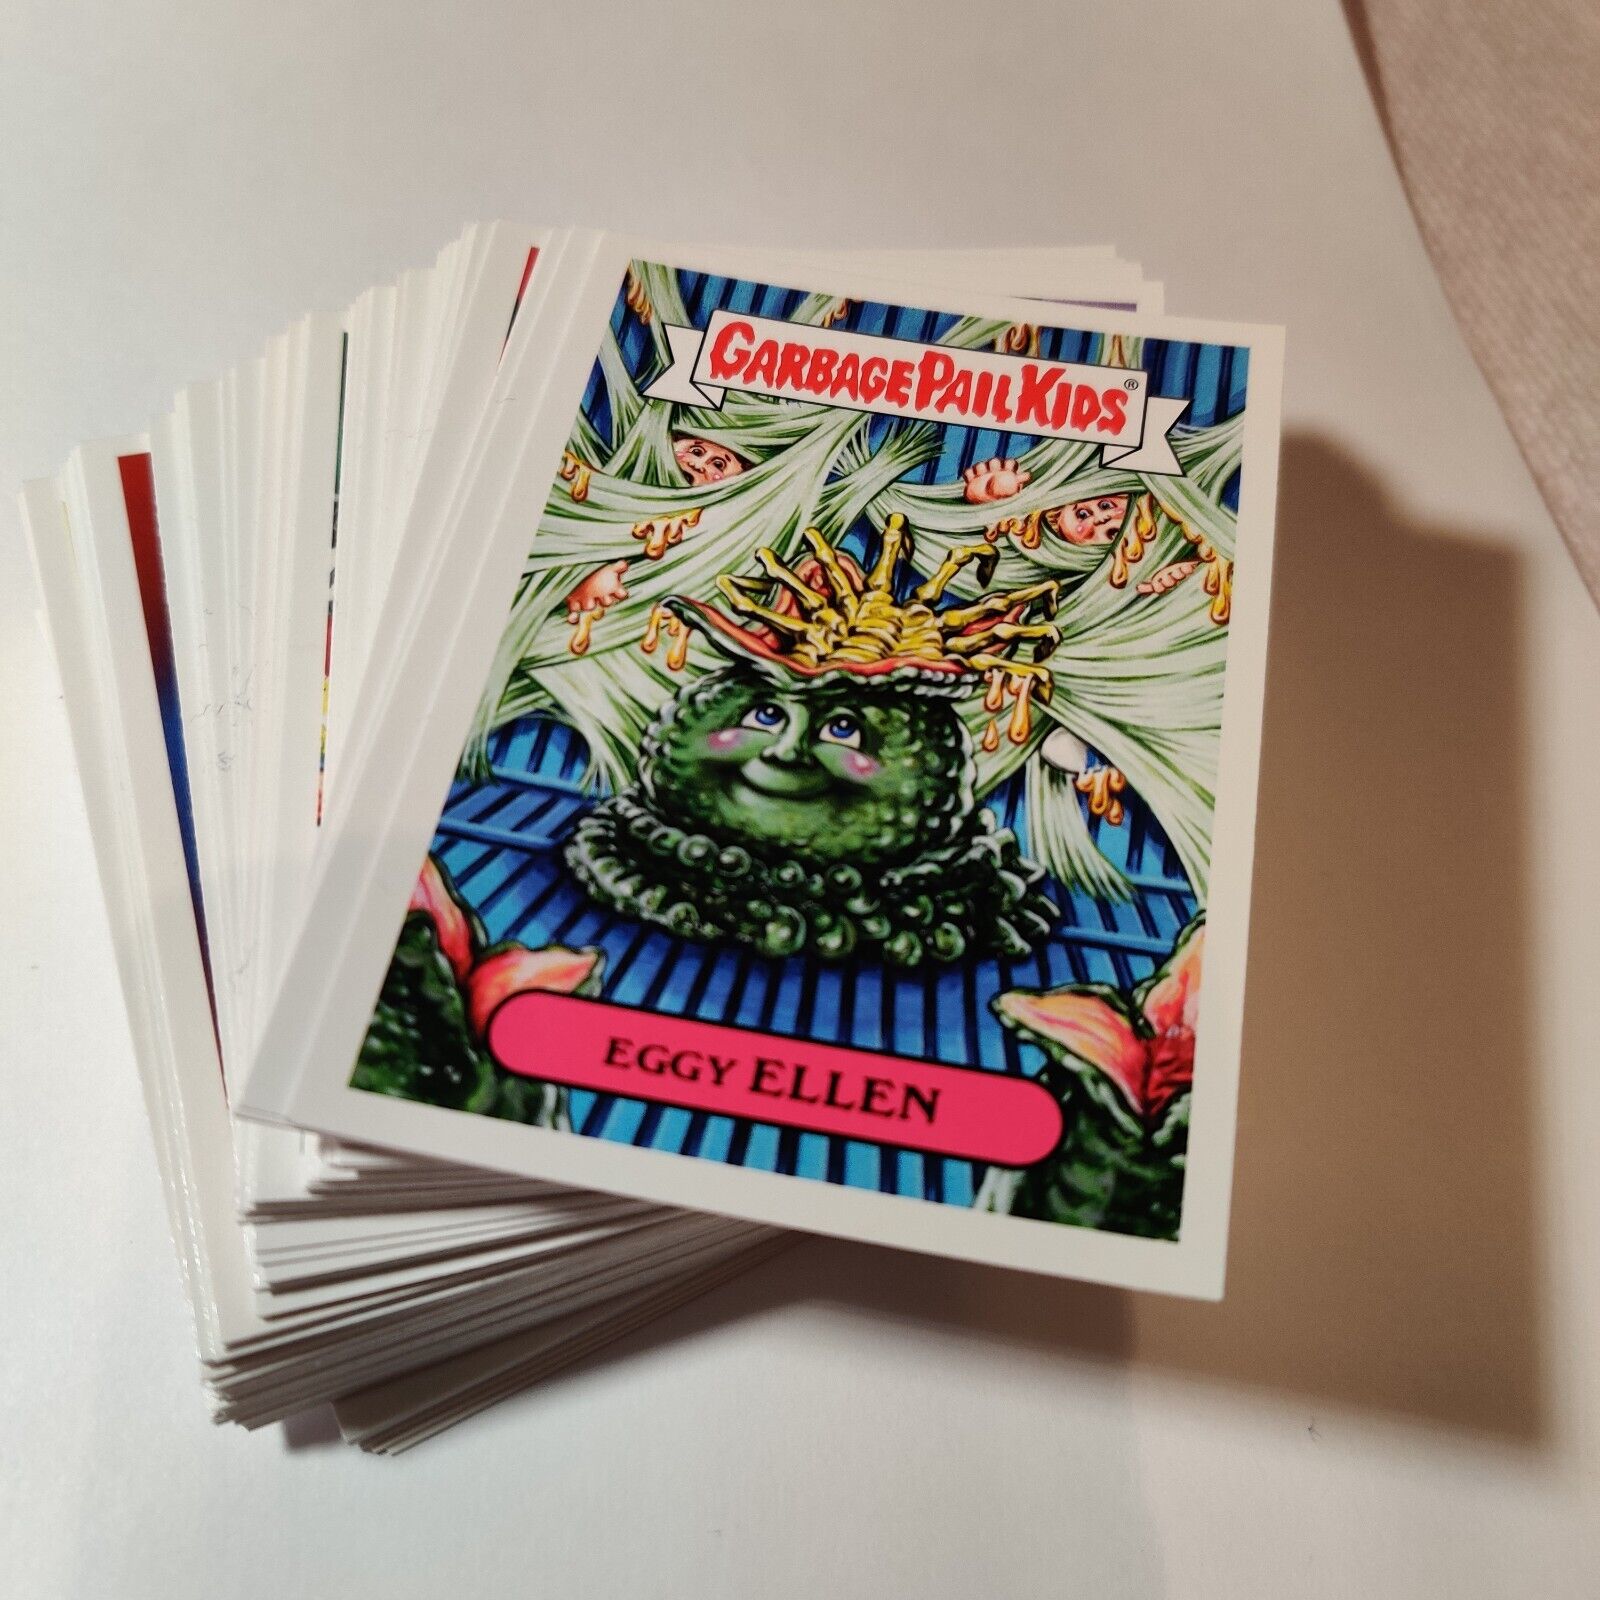 2019 Garbage Pail Kids GPK Revenge of Oh The Horror-ible * PICK -A- CARD*